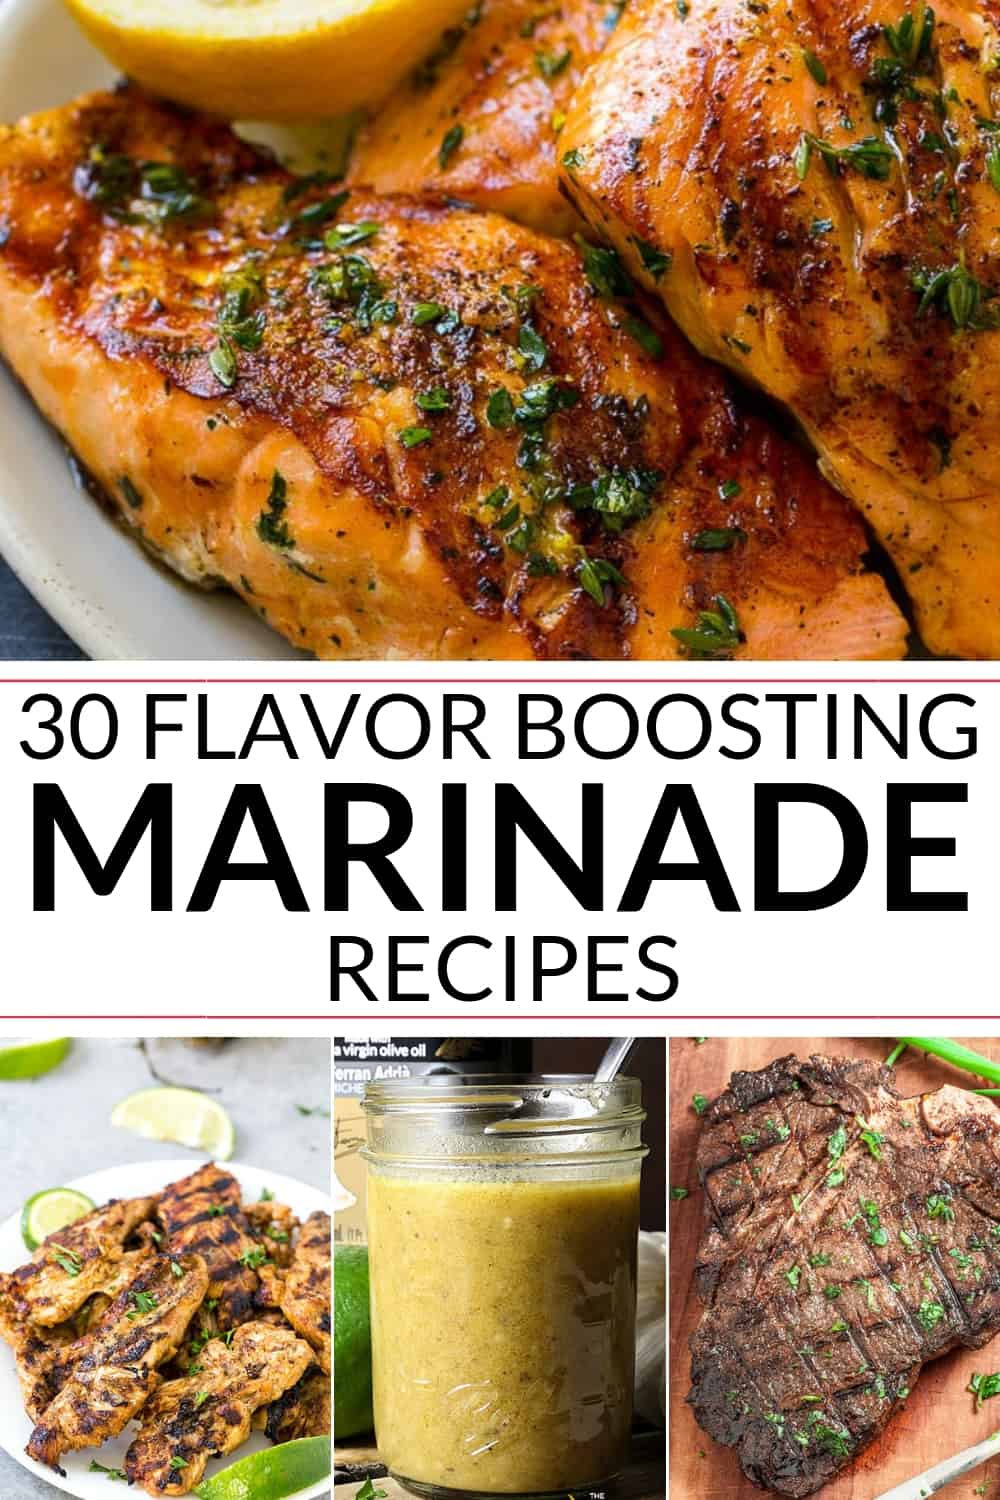 A collection of marinade recipes